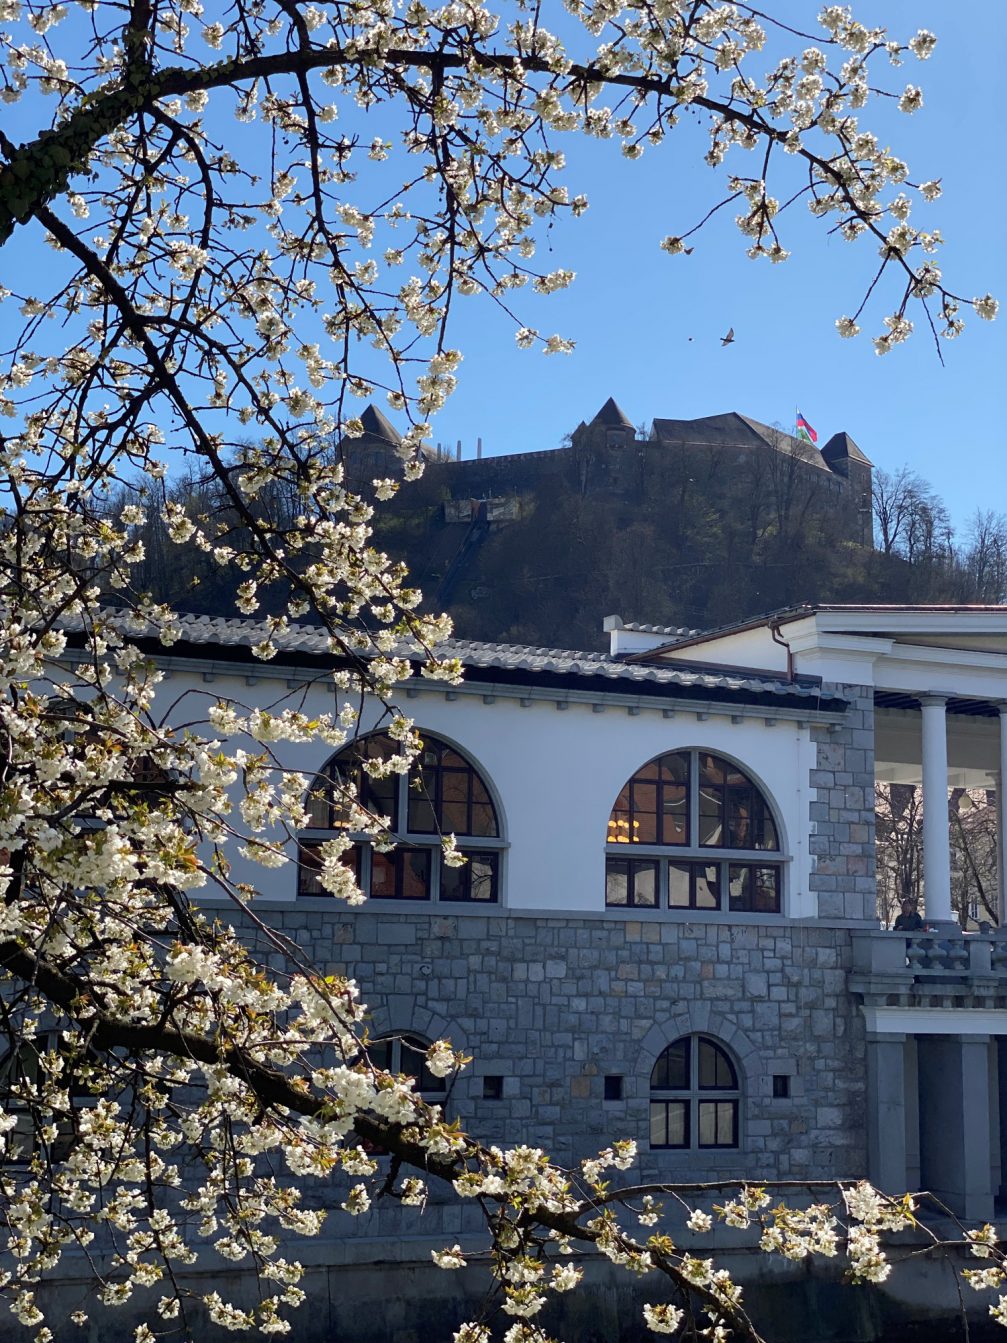 Ljubljana with its hilltop castle in early spring 